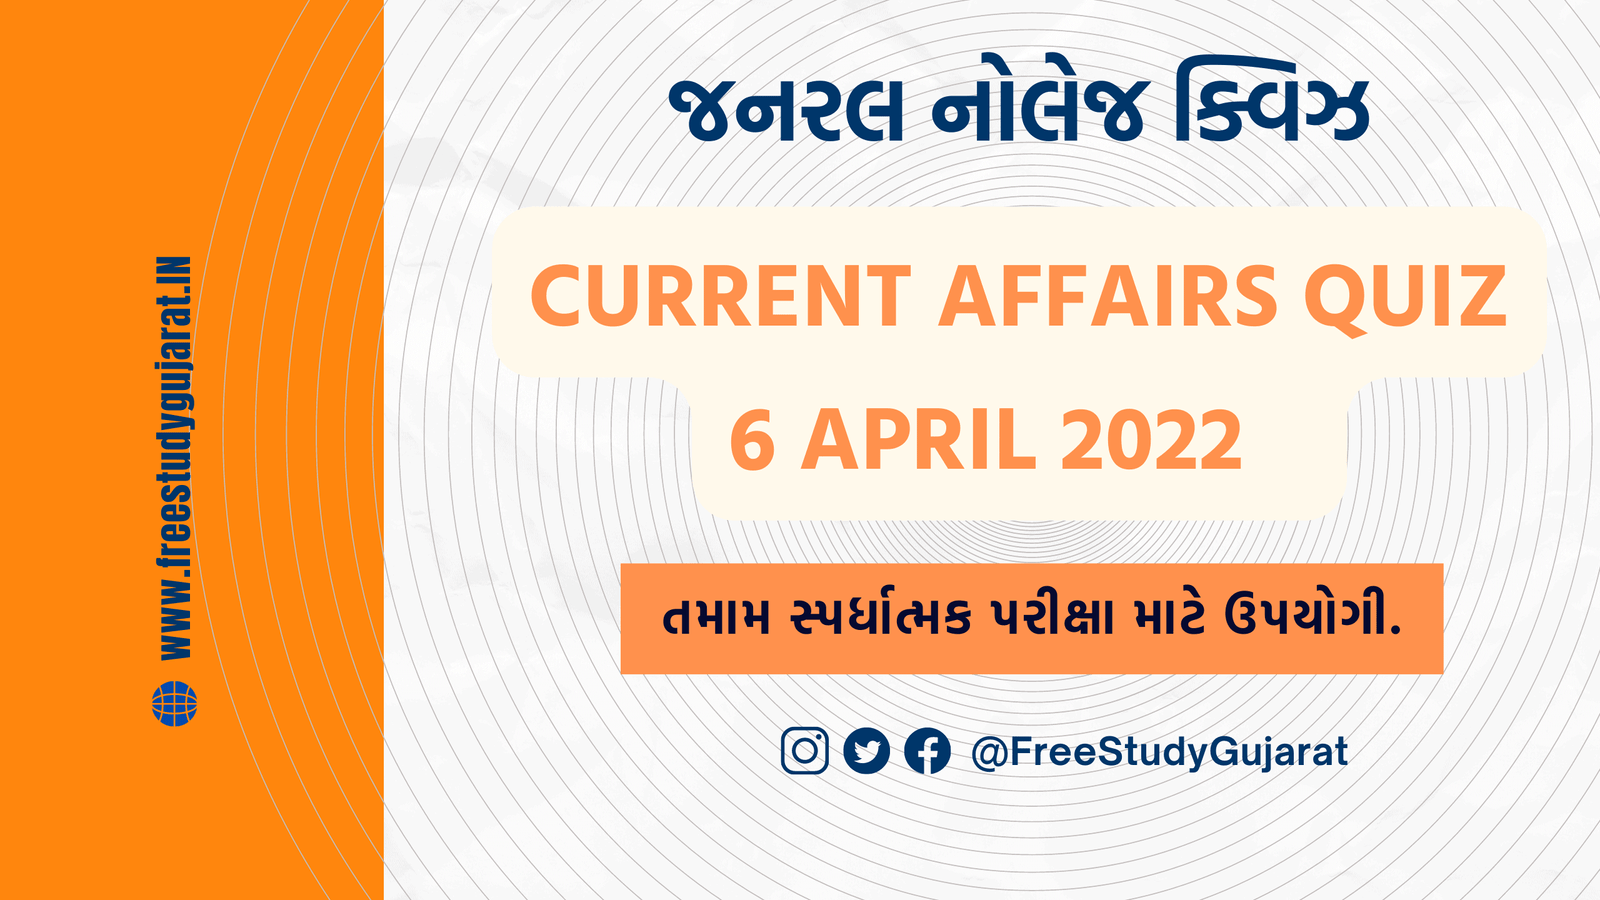 Red and White Modern Action Gaming Livestream Youtube Channel Art 9, 6 APRIL CURRENT AFFAIRS QUIZ 2022 | કરંટ અફેર્સ ક્વિઝ